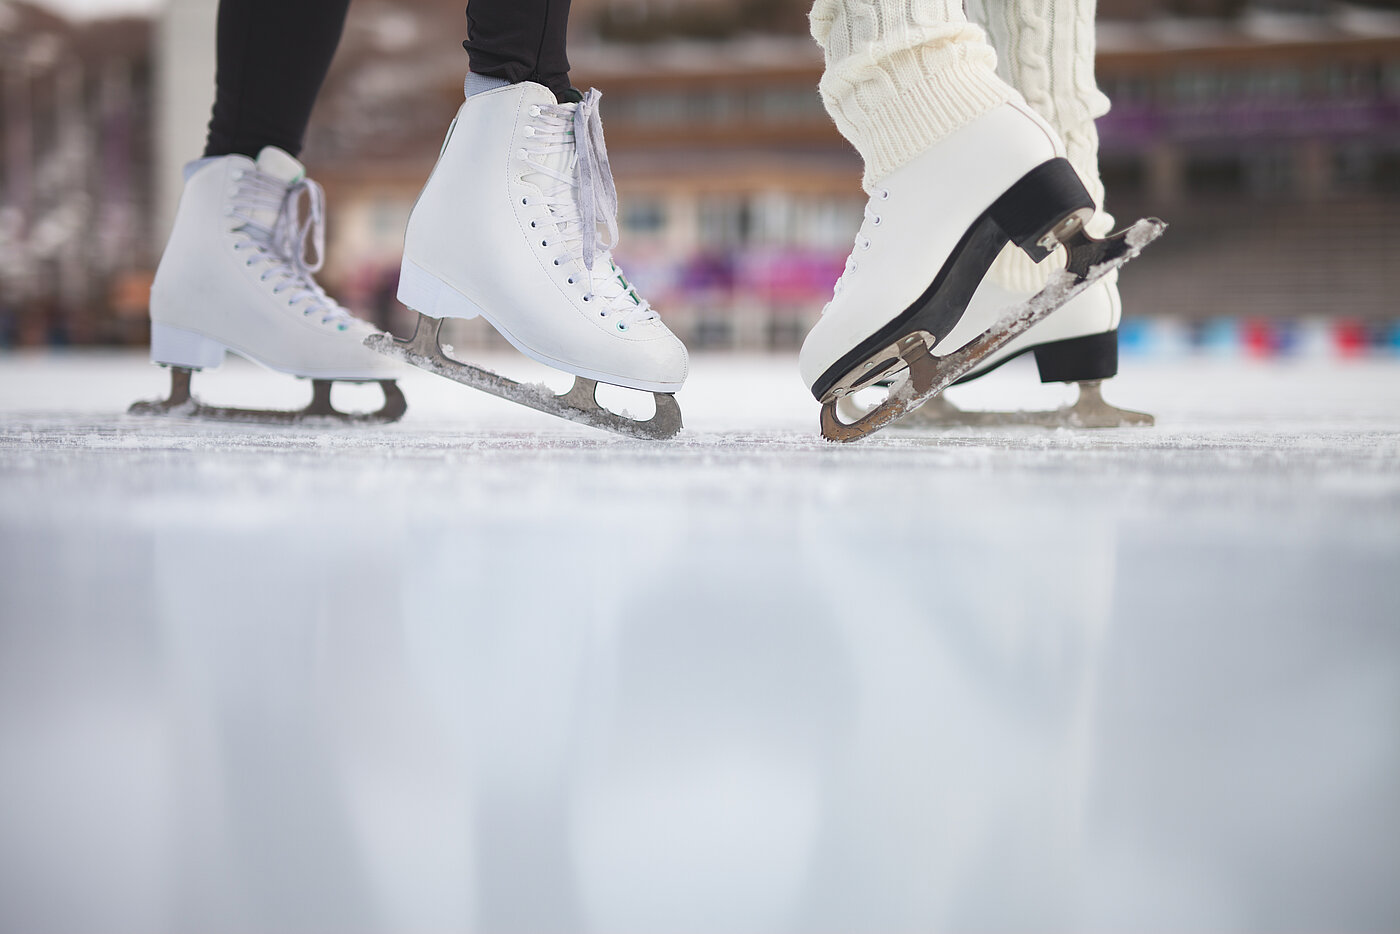 The photo shows two people ice-skating, the shot is cropped to show their ice-skates